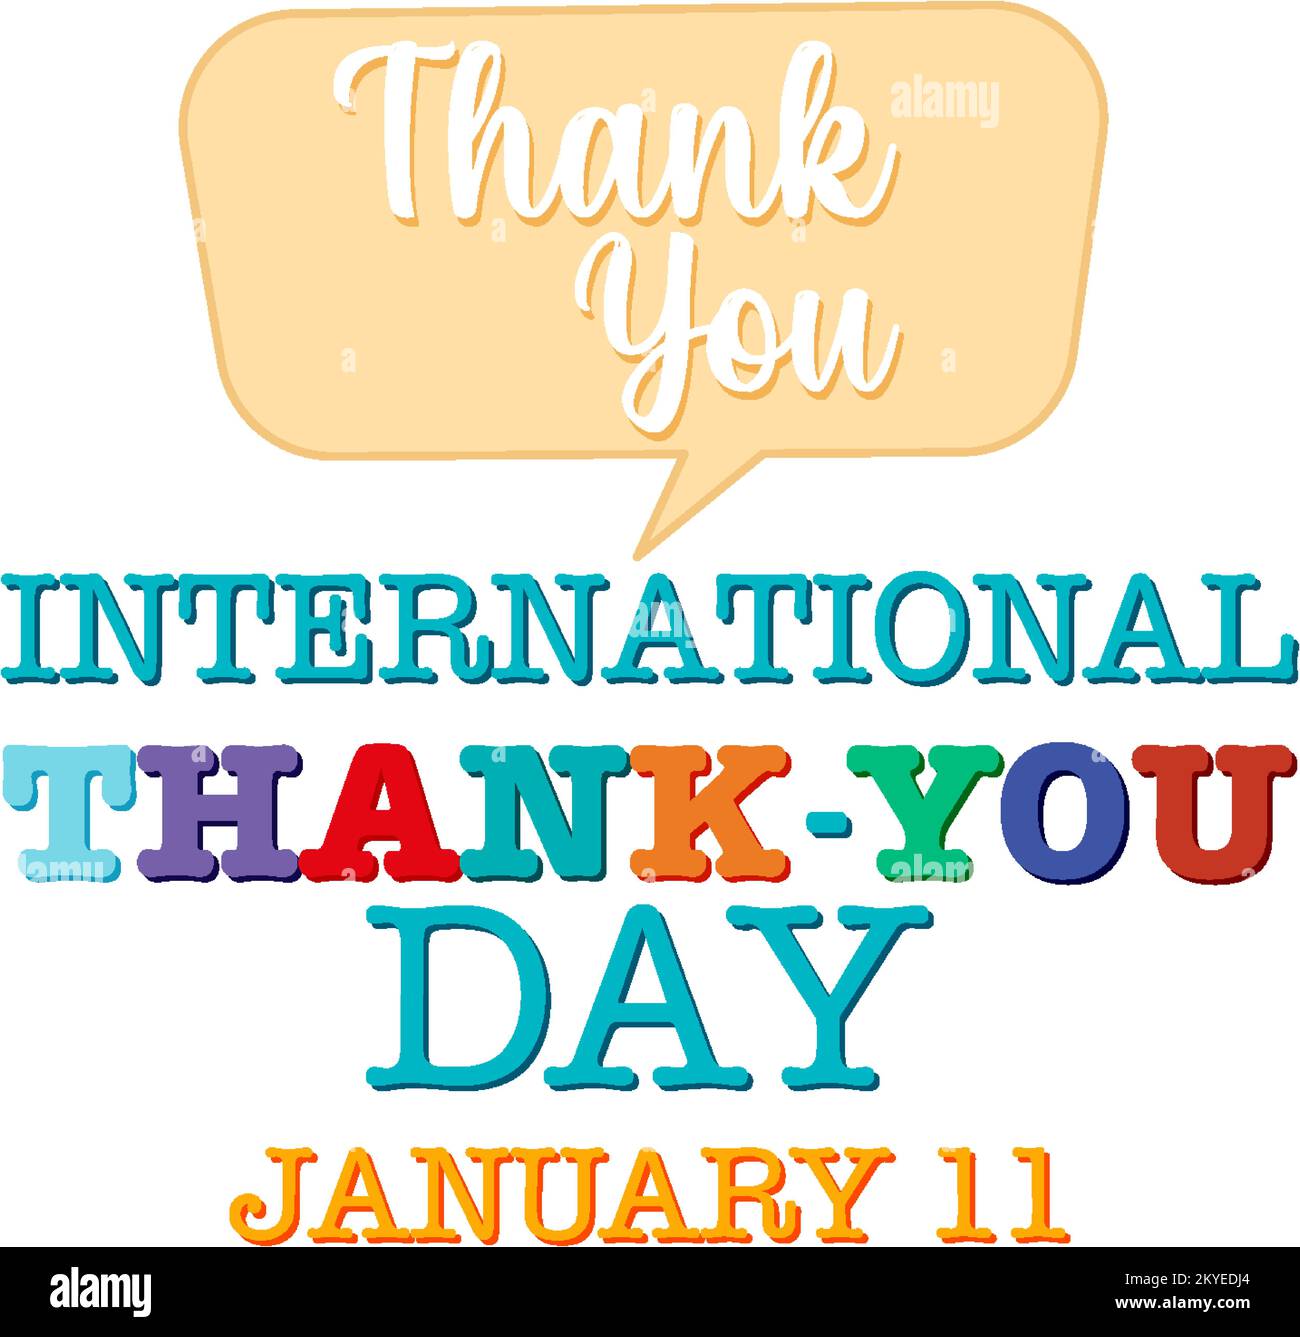 International thank you day icon illustration Stock Vector